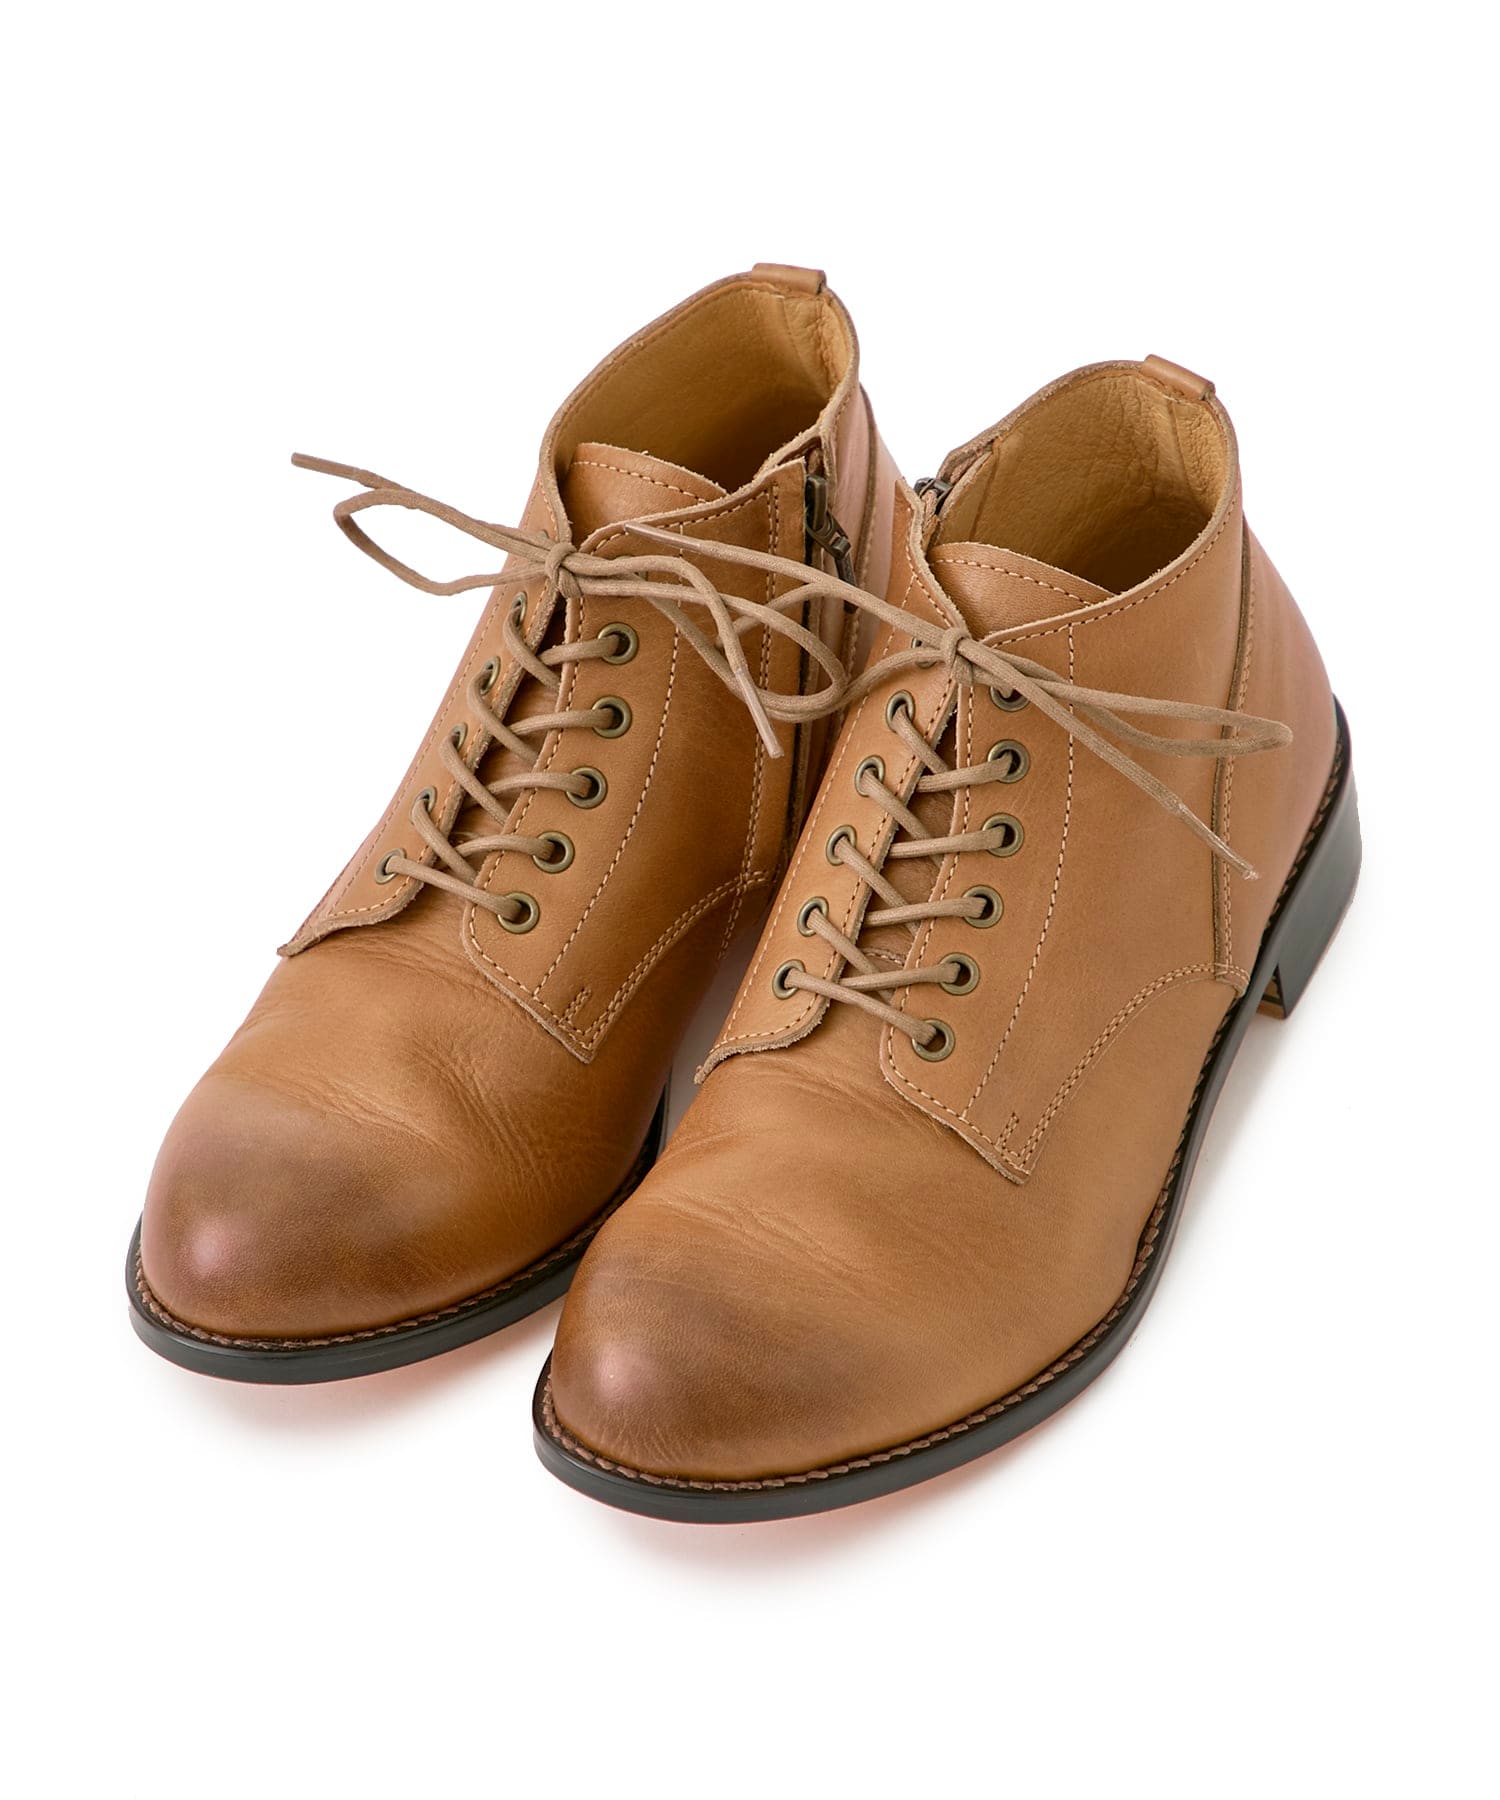 CHUKKA BOOTS WITH SIDE ZIP